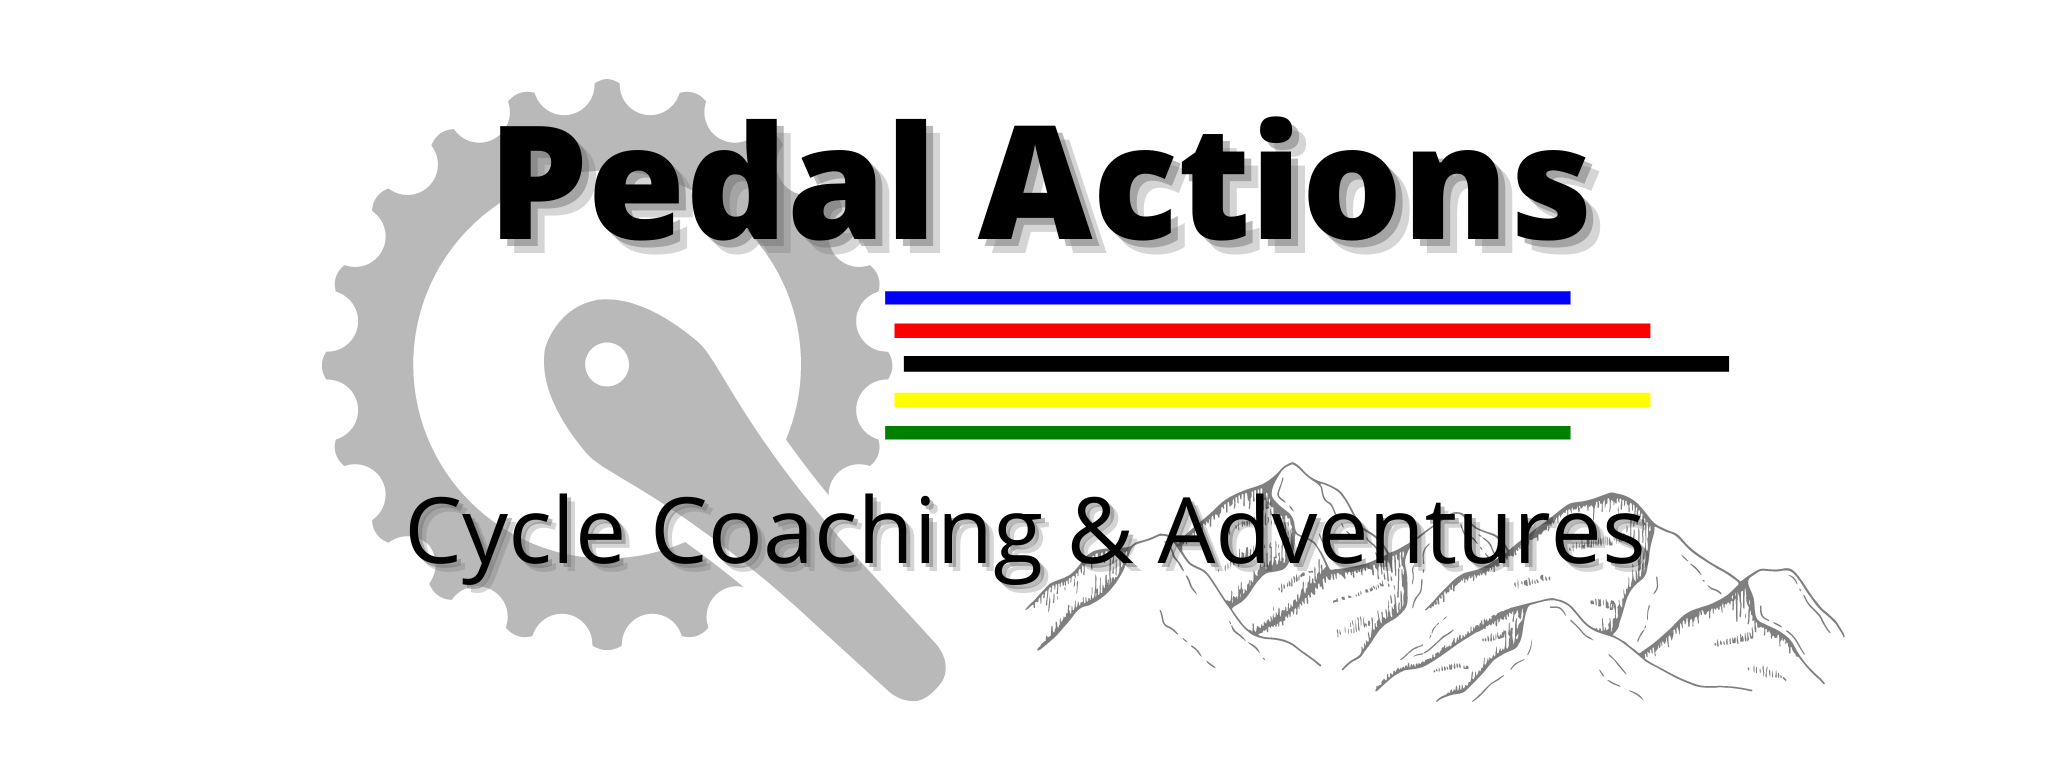 Pedal Actions - Bike Fitting And Cycle Coaching